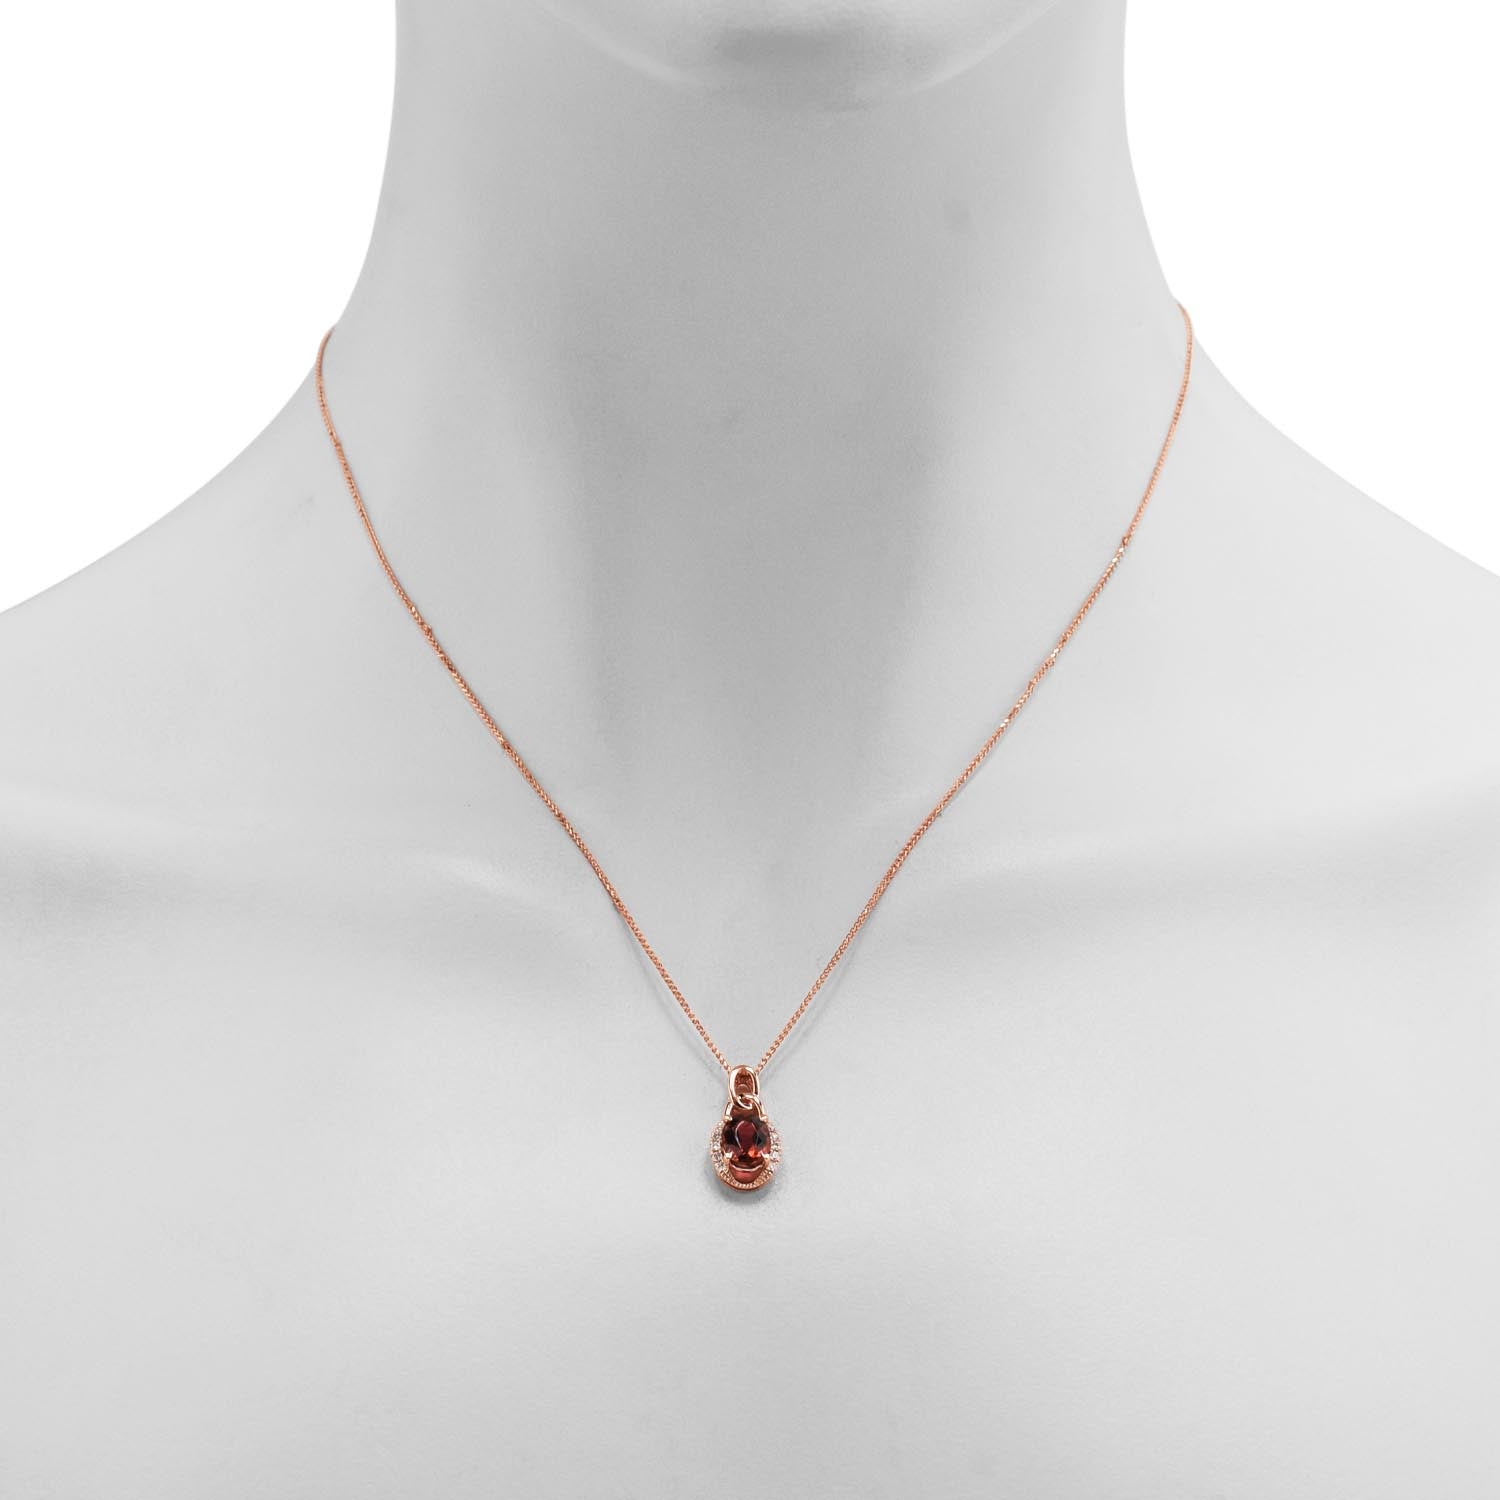 Maine Pink Tourmaline Necklace in 14kt Rose Gold with Diamonds (1/10ct tw)